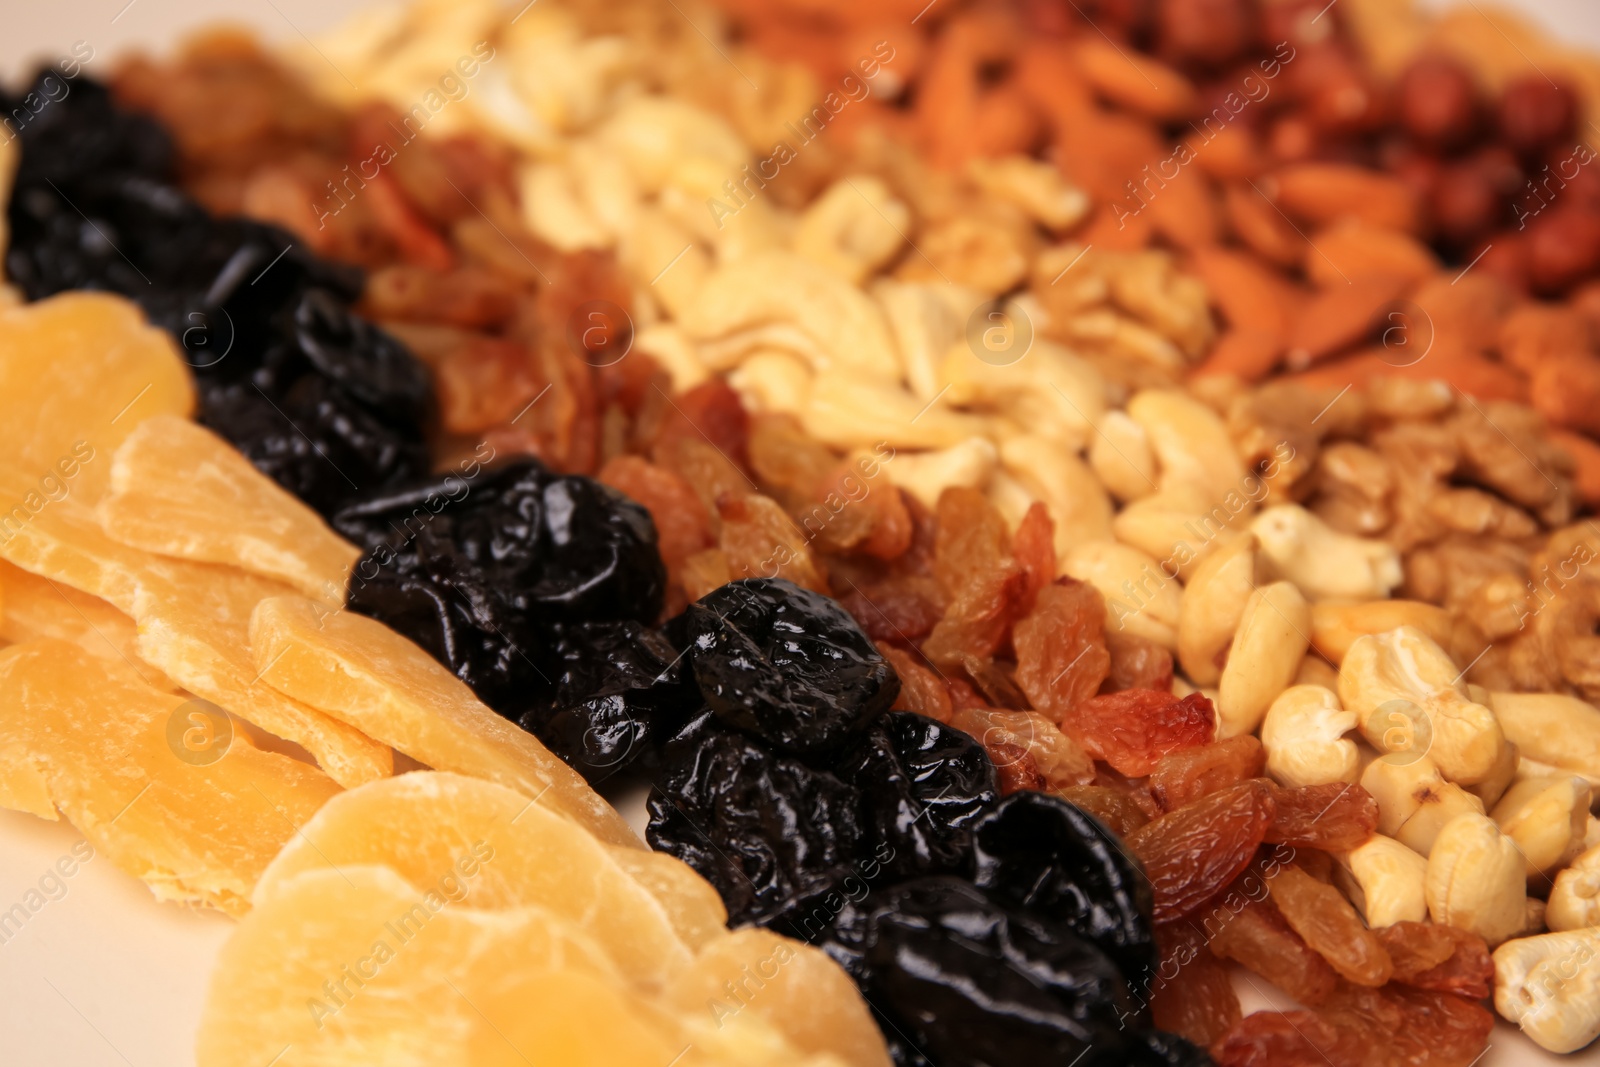 Photo of Mix of delicious dried nuts and fruits on beige background, closeup